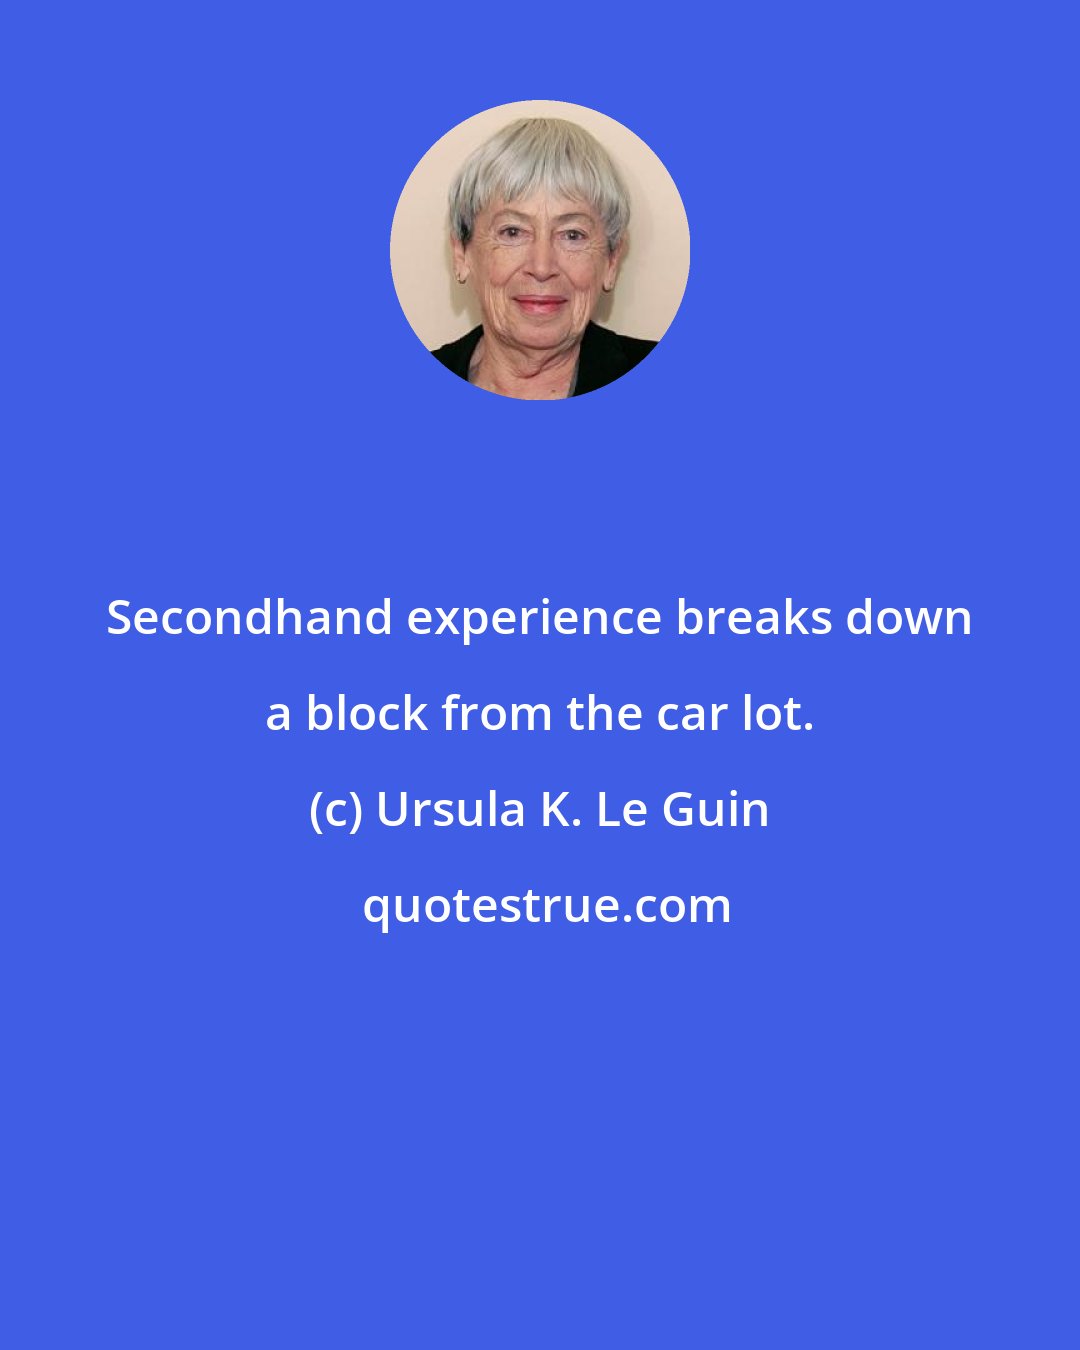 Ursula K. Le Guin: Secondhand experience breaks down a block from the car lot.